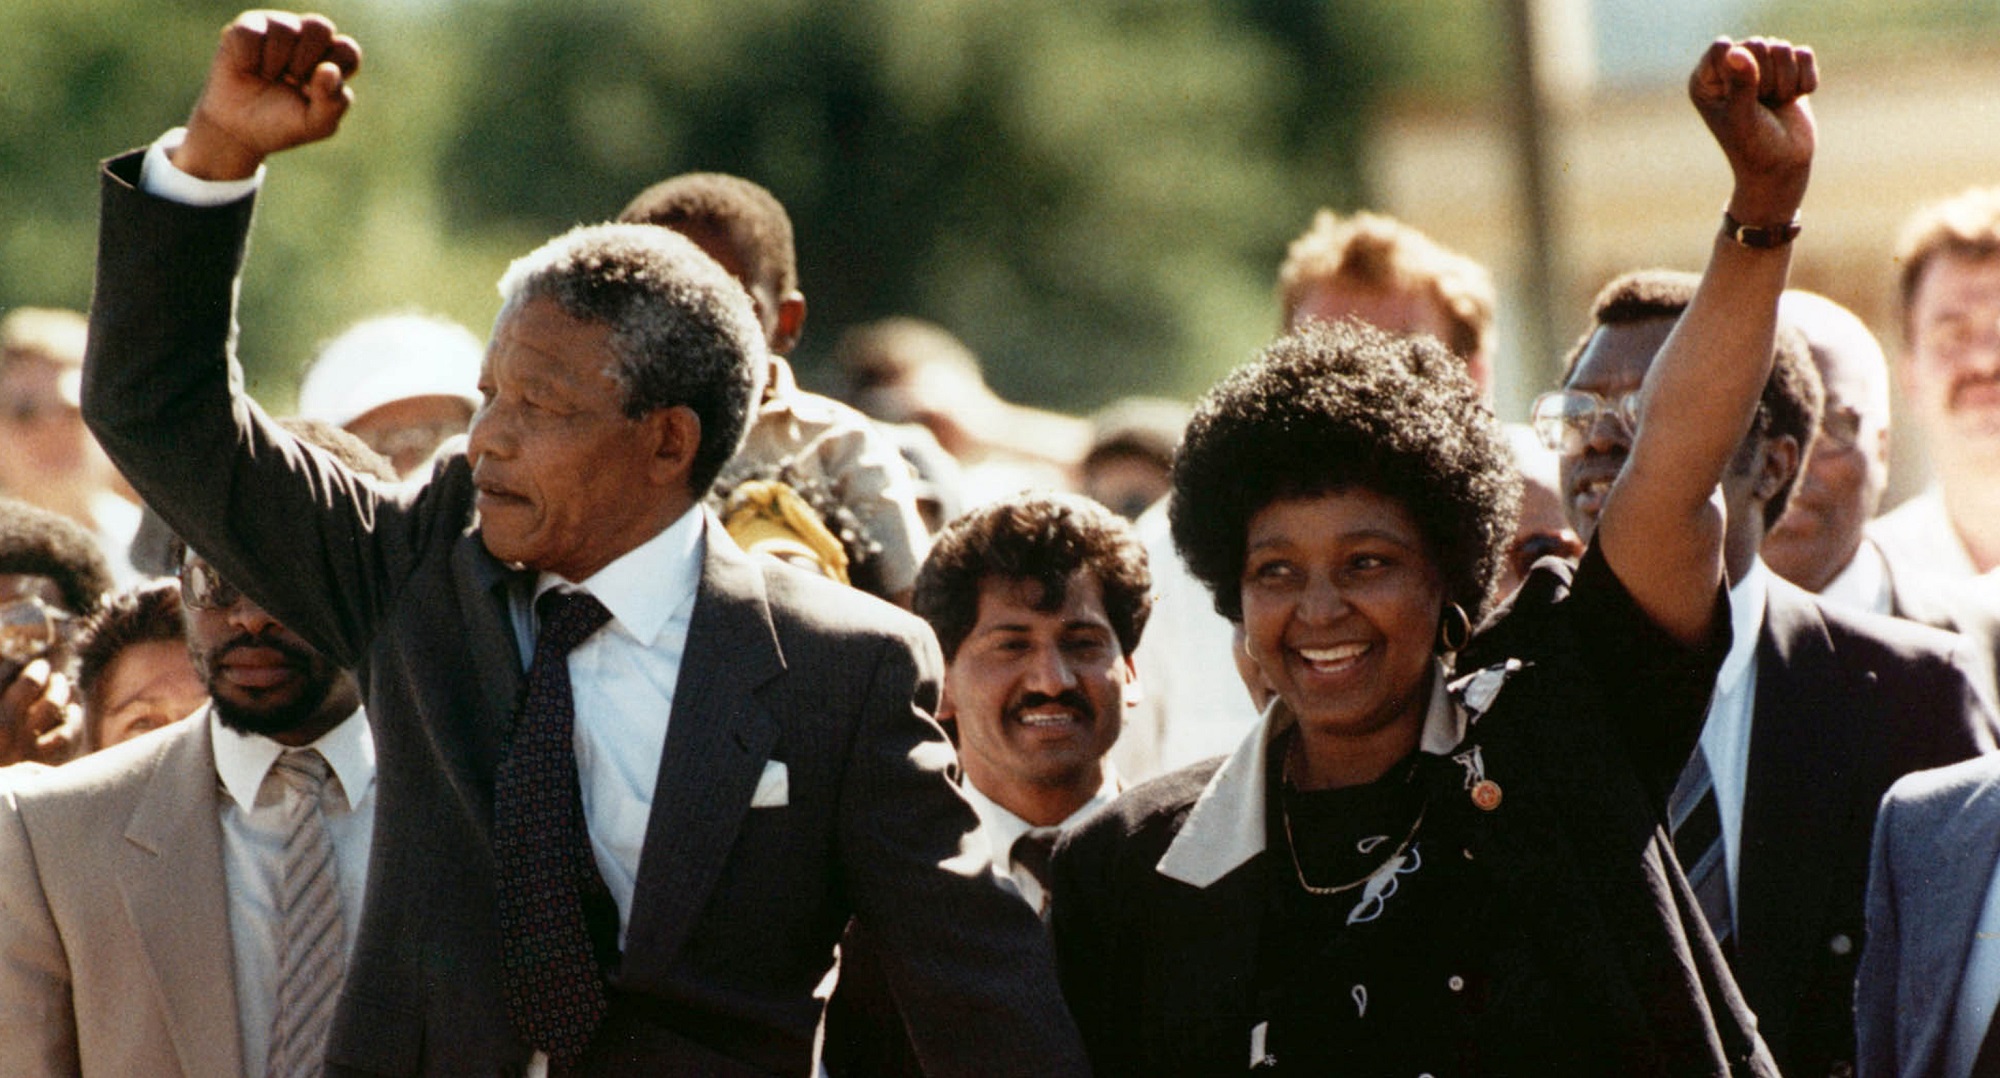 FILE -- In this Sunday, Feb. 11, 1990 file photo, Nelson Mandela and wife Winnie, walk hand-in hand-with their raised clenched fists upon Mandela's release from Victor Verster prison, near Cape Town South Africa. Mandela never met with Martin Luther King Jr but the two fought for the same issues at the same time on two different continents. Mandela said in a 1964 speech that he was prepared to die to see his dream of a society where blacks and whites were equal become reality. King was killed by an assassin's bullet while working for that same dream. ( (AP Photo/Greg English, File)